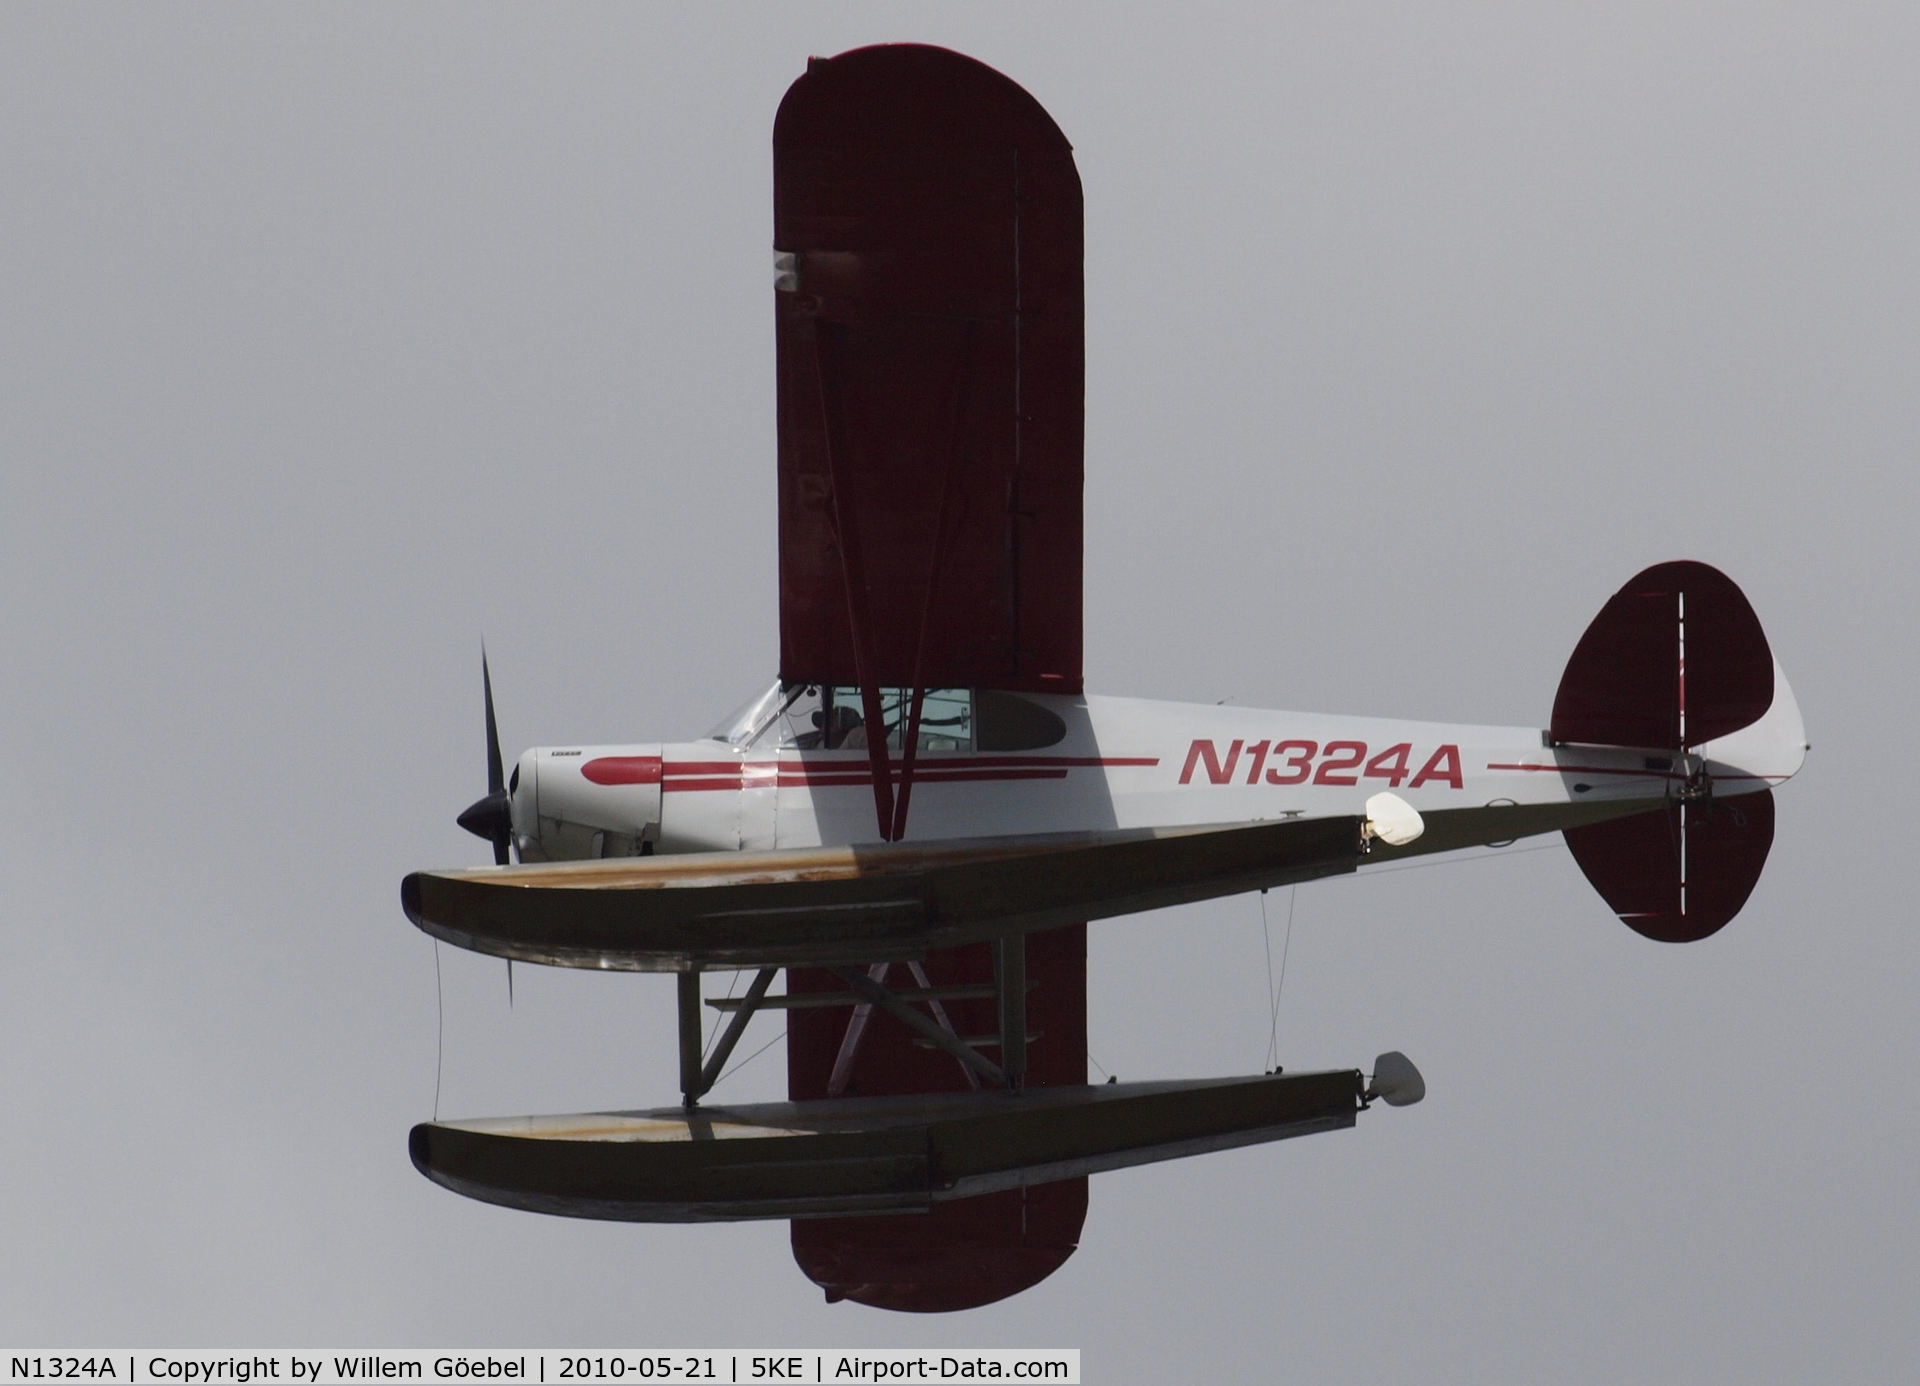 N1324A, 1951 Piper PA-18-125 Super Cub C/N 18-1134, Fly over in Ketchikan Harbor